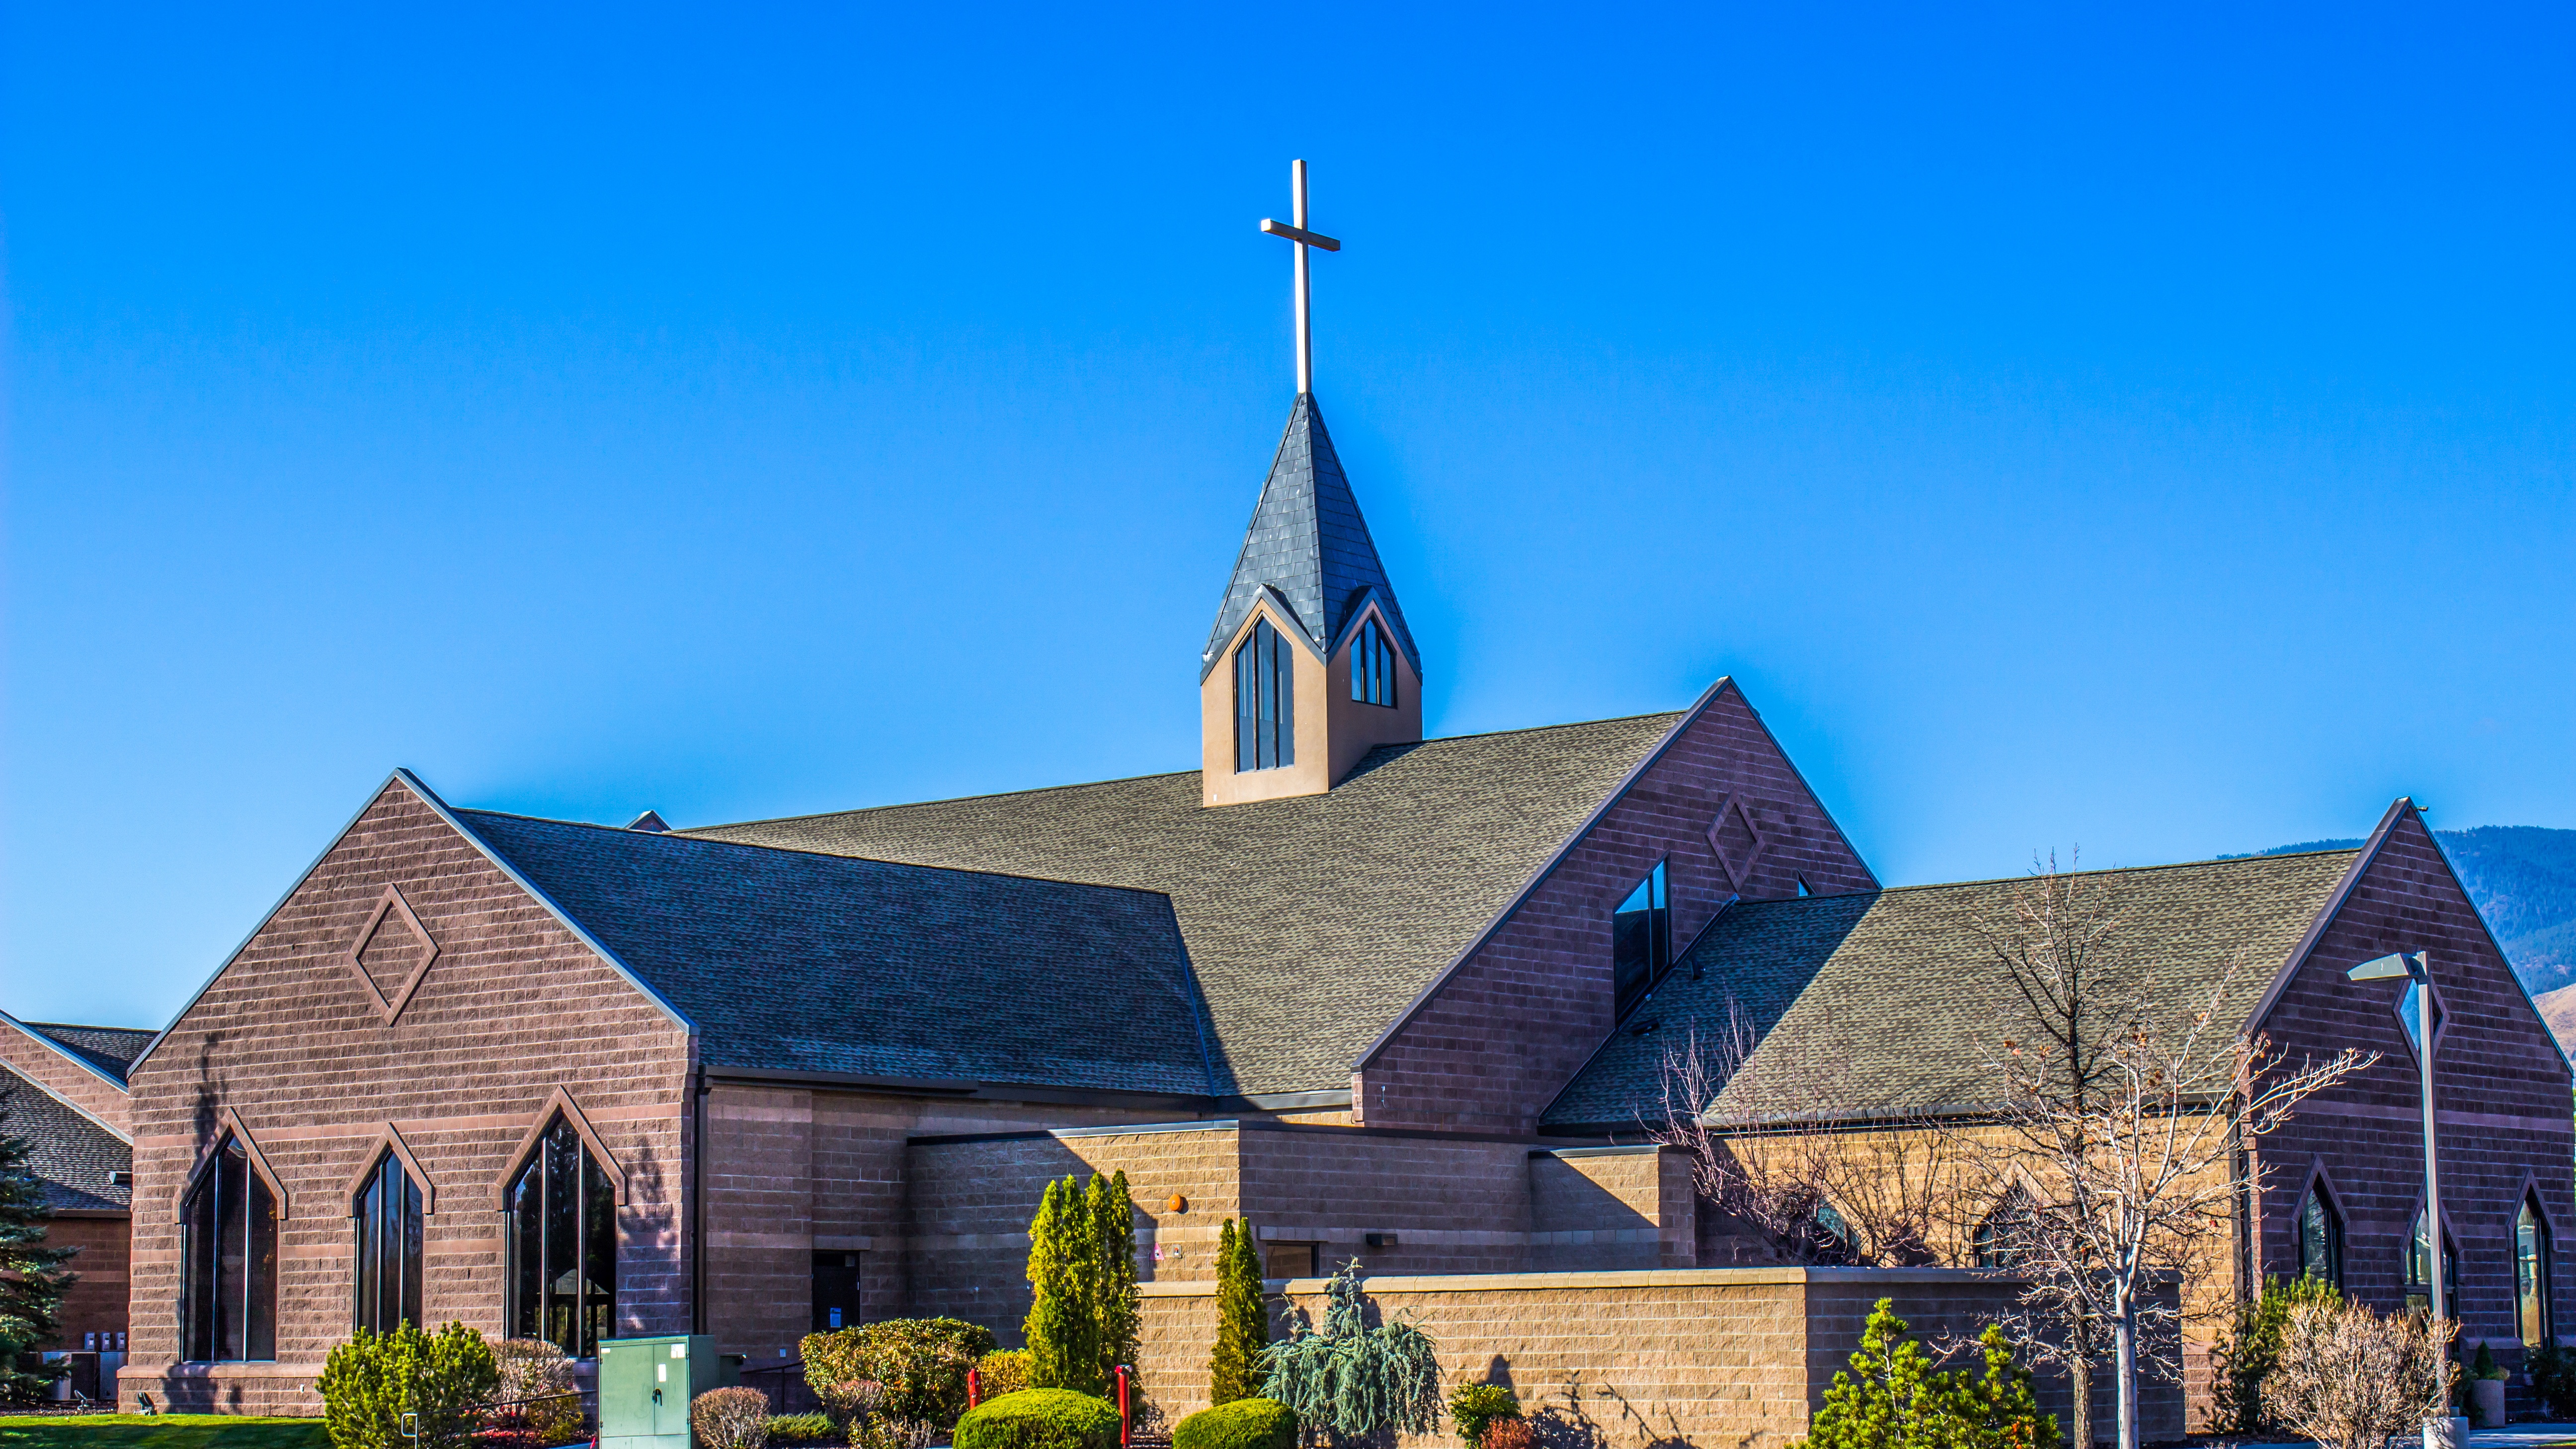 A large church with a steeple and cross, gray asphalt shingle roofing, and blue sky in the background